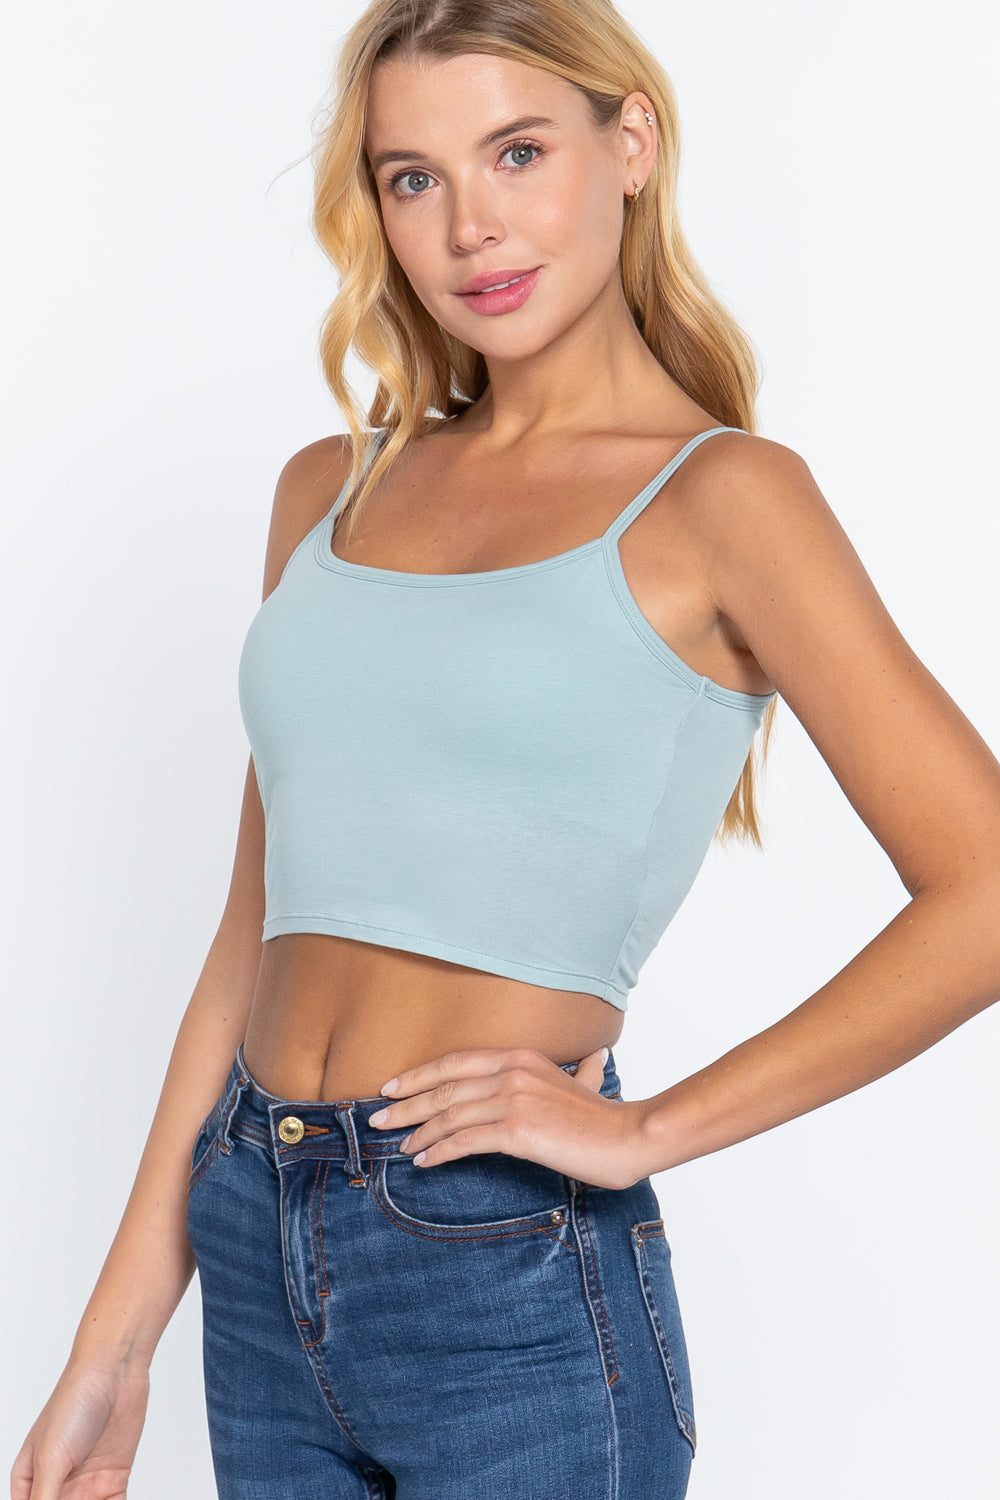 Round Neck with Removable Bra Cup Cotton Spandex Bra Top in Sky Mint